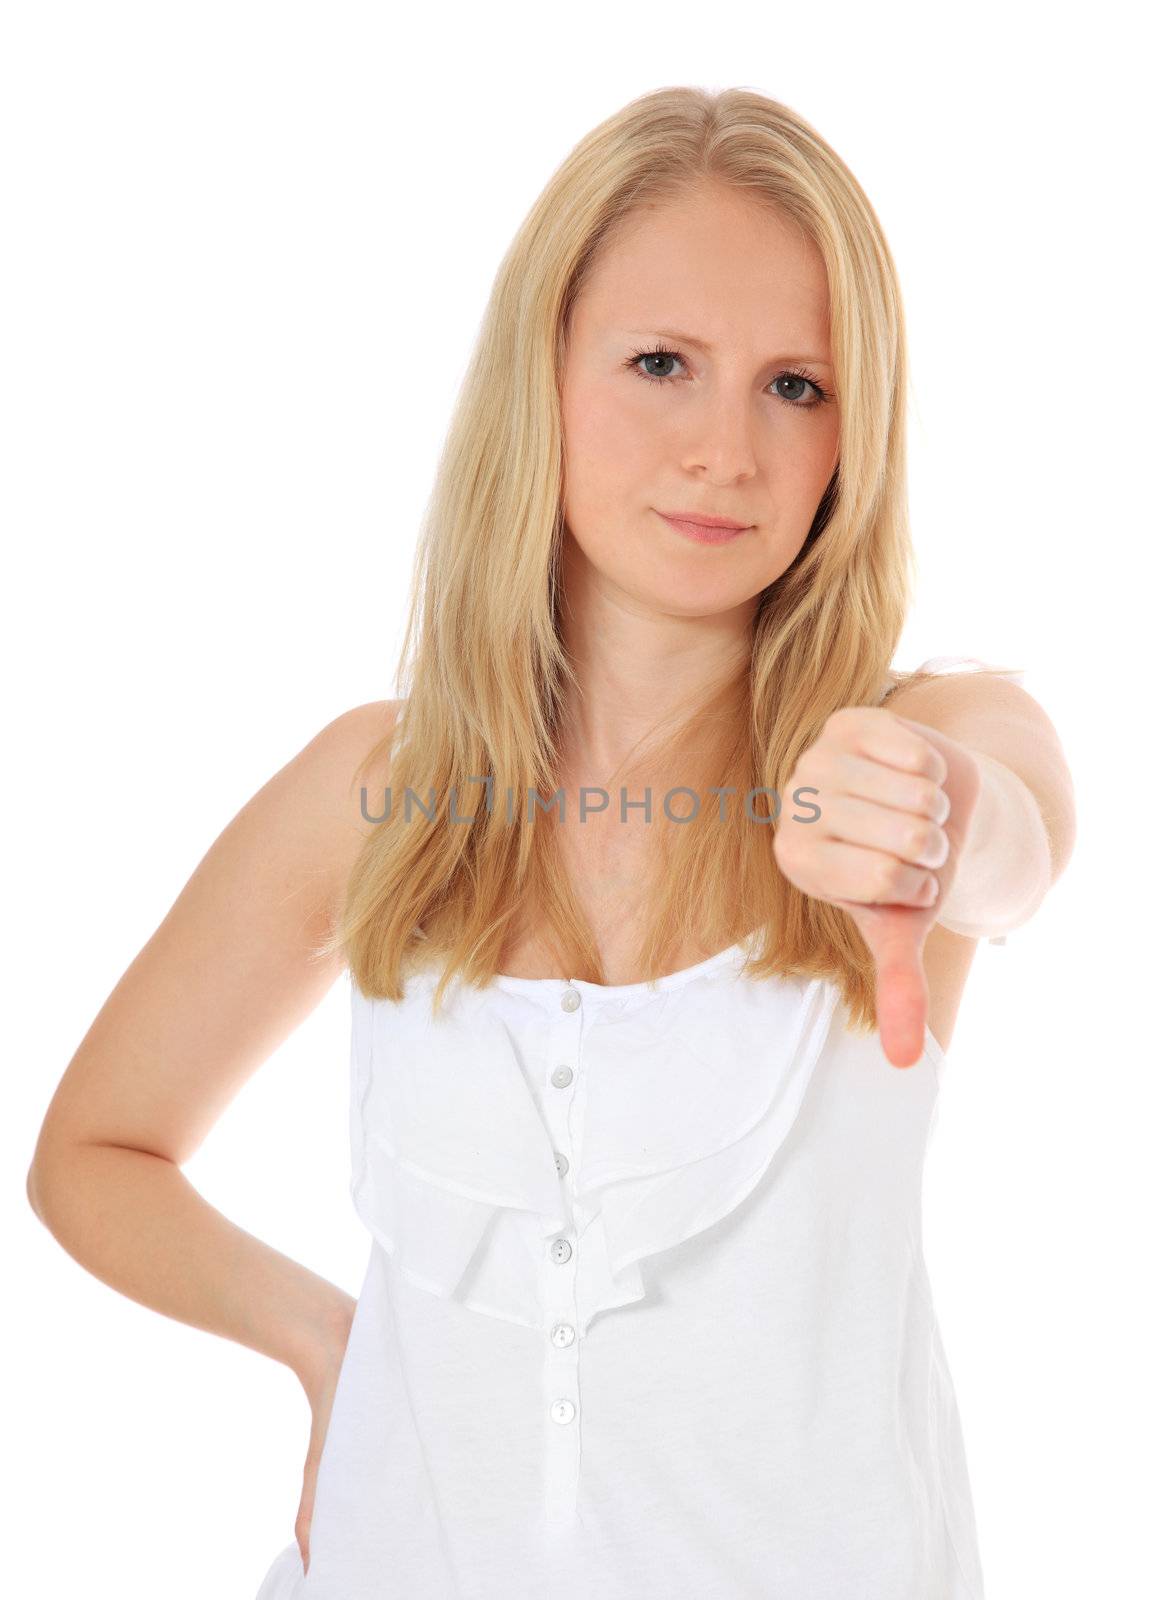 Attractive blond girl showing thumb down. All on white background.